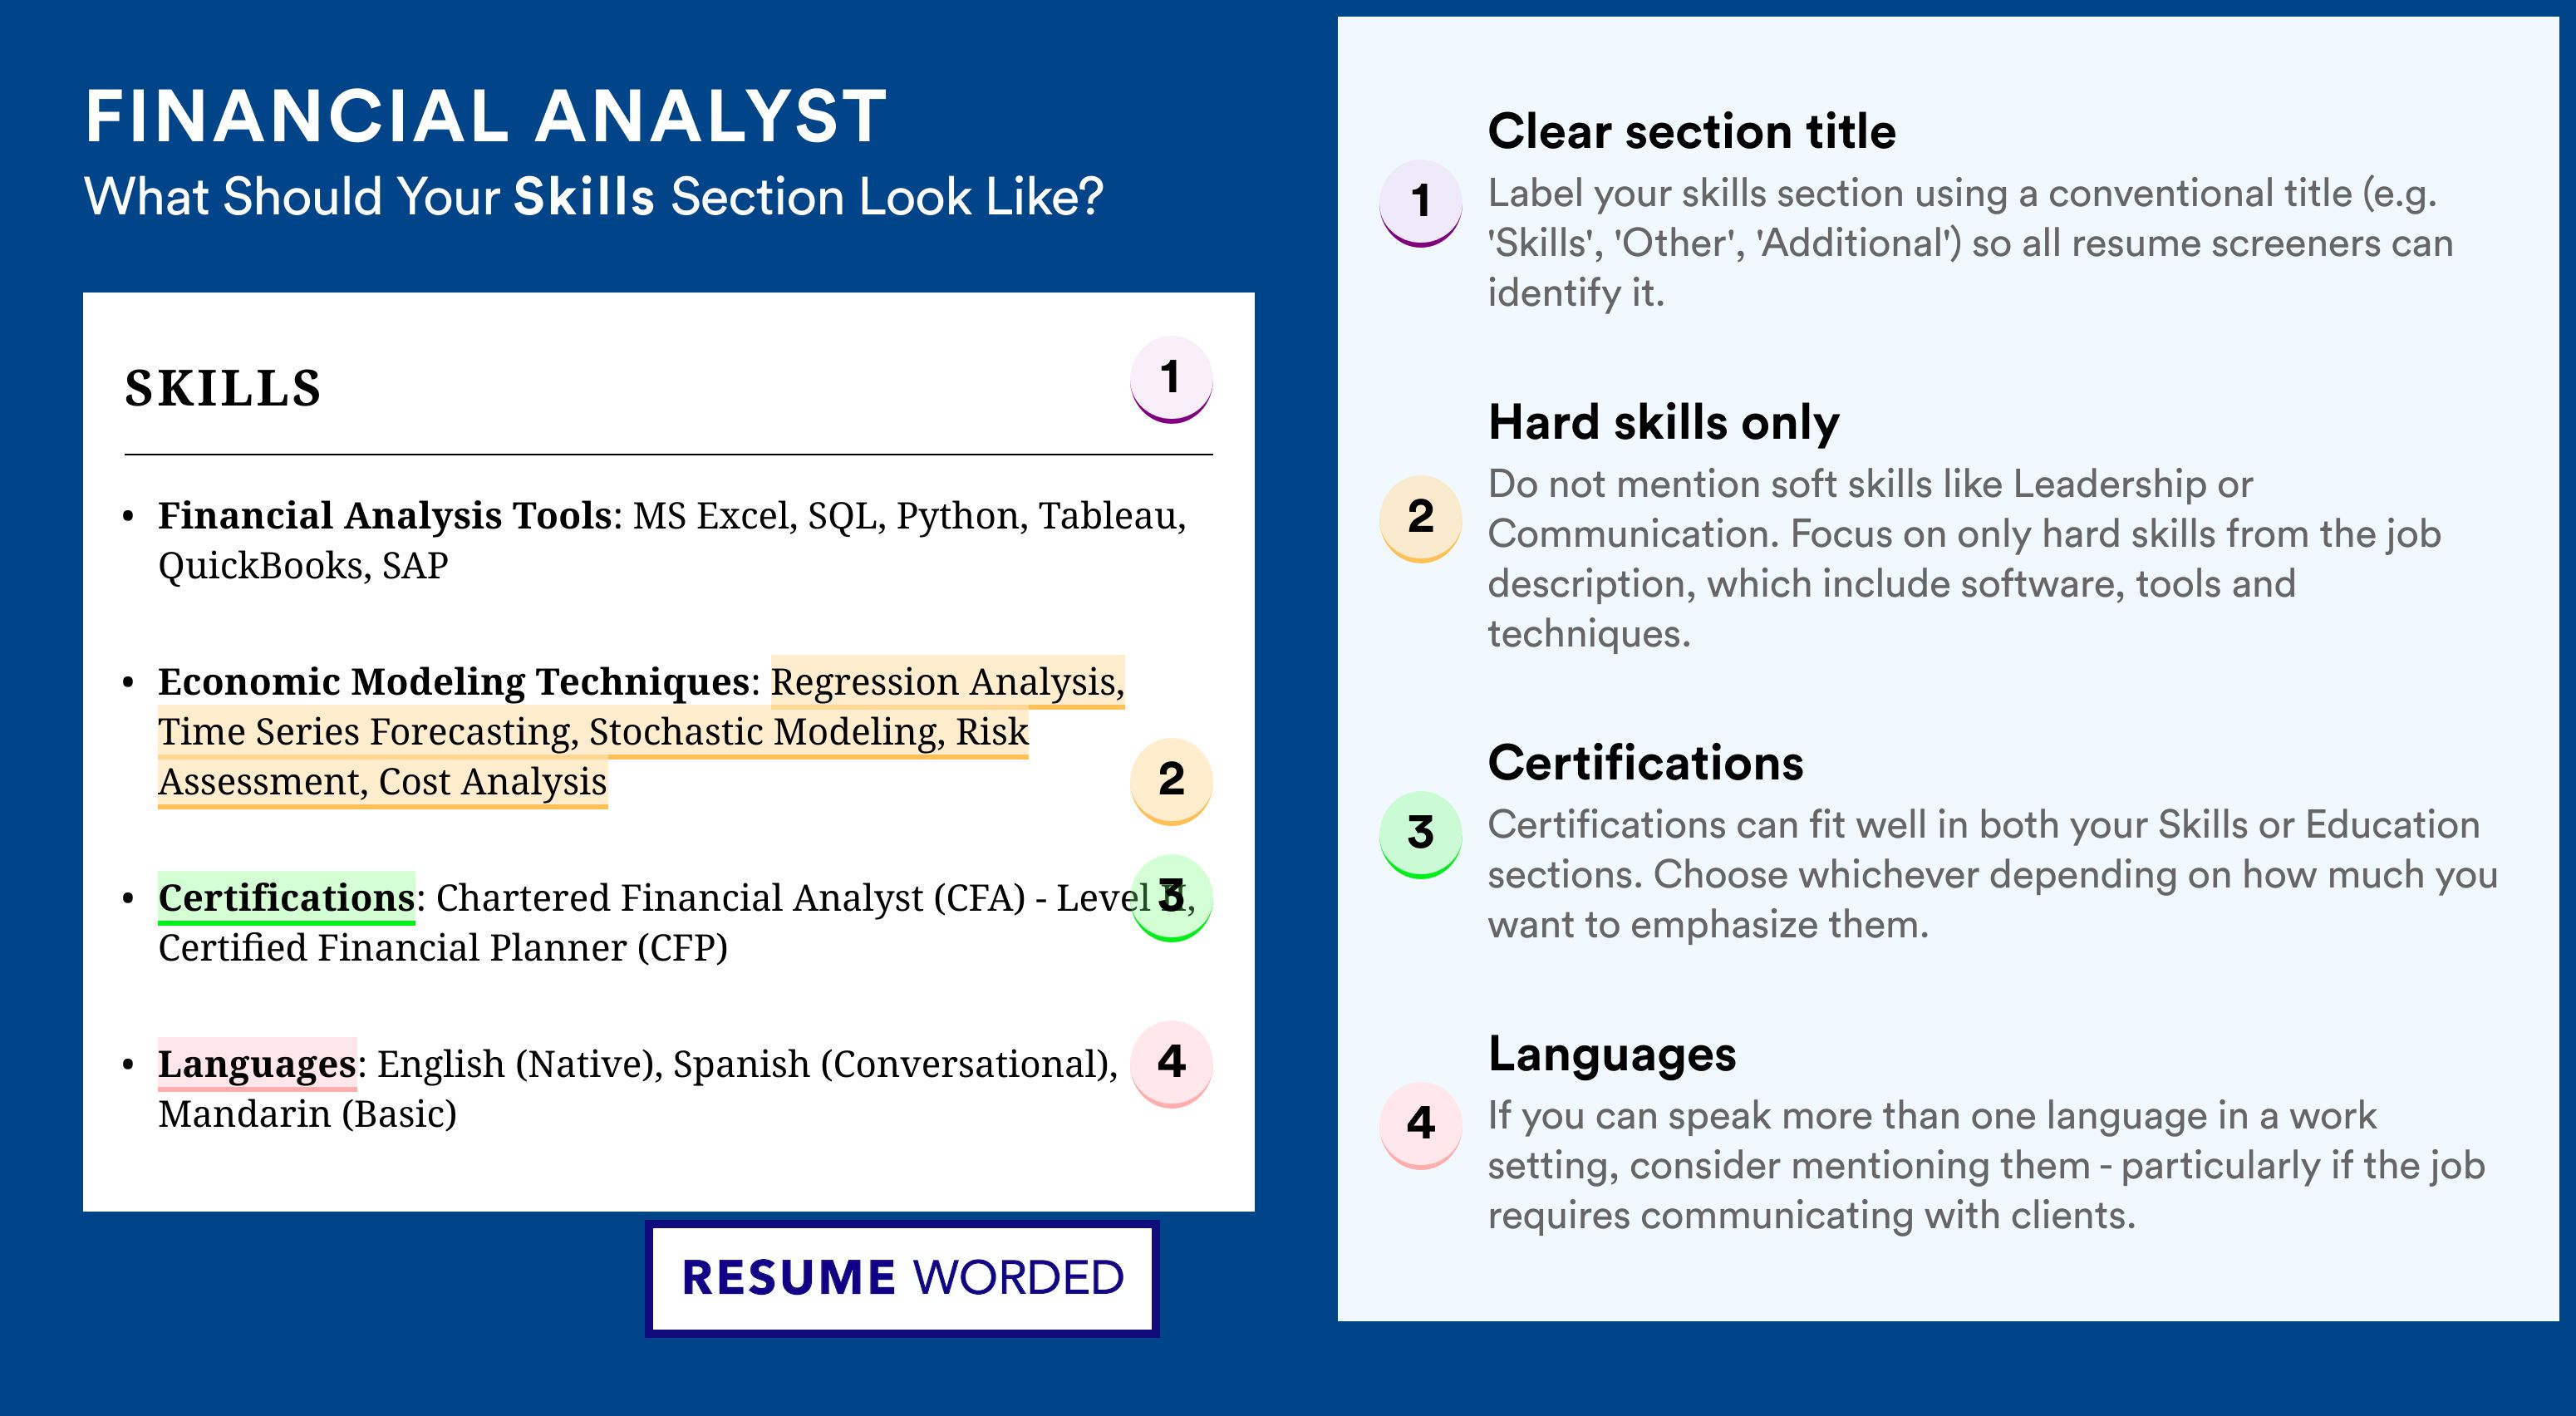 How To Write Your Skills Section - Financial Analyst Roles